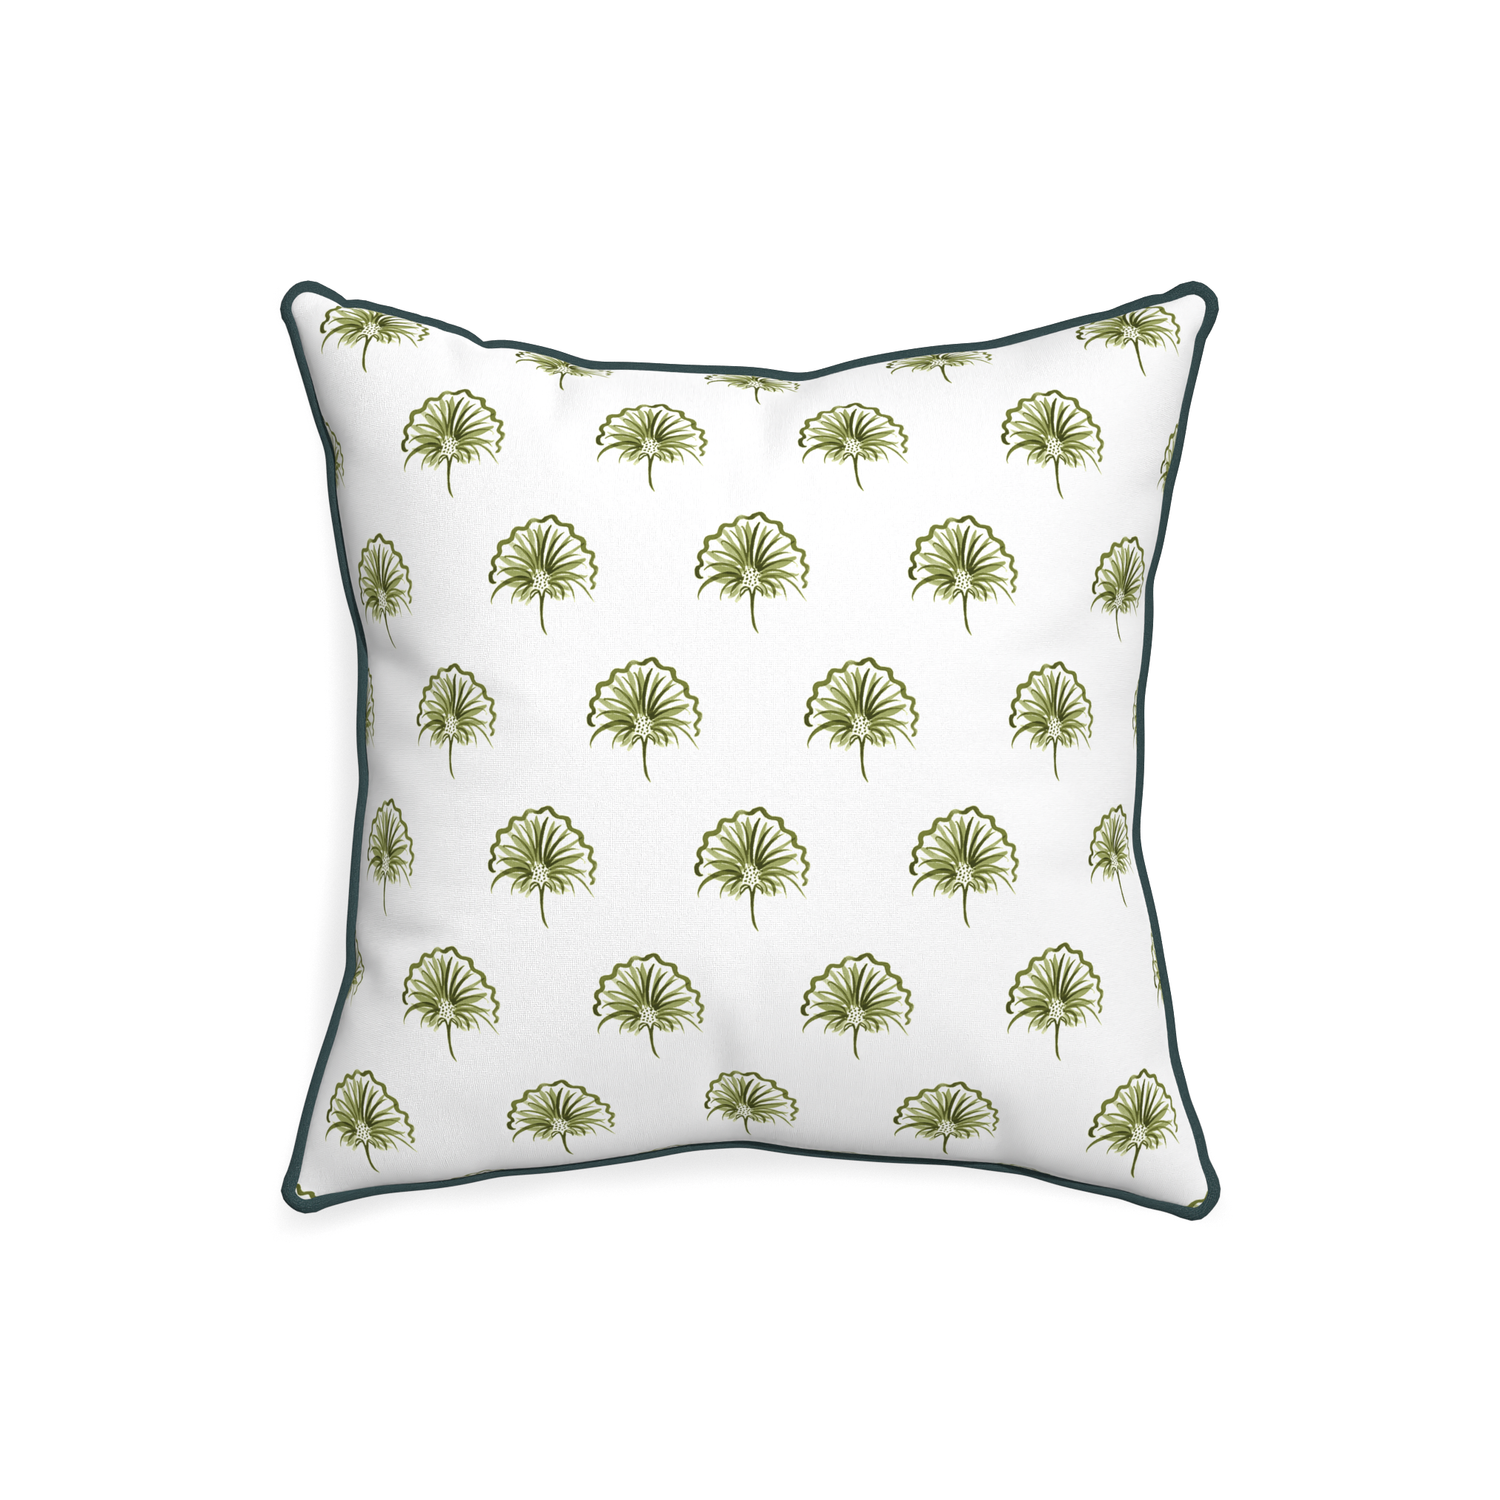 20-square penelope moss custom green floralpillow with p piping on white background